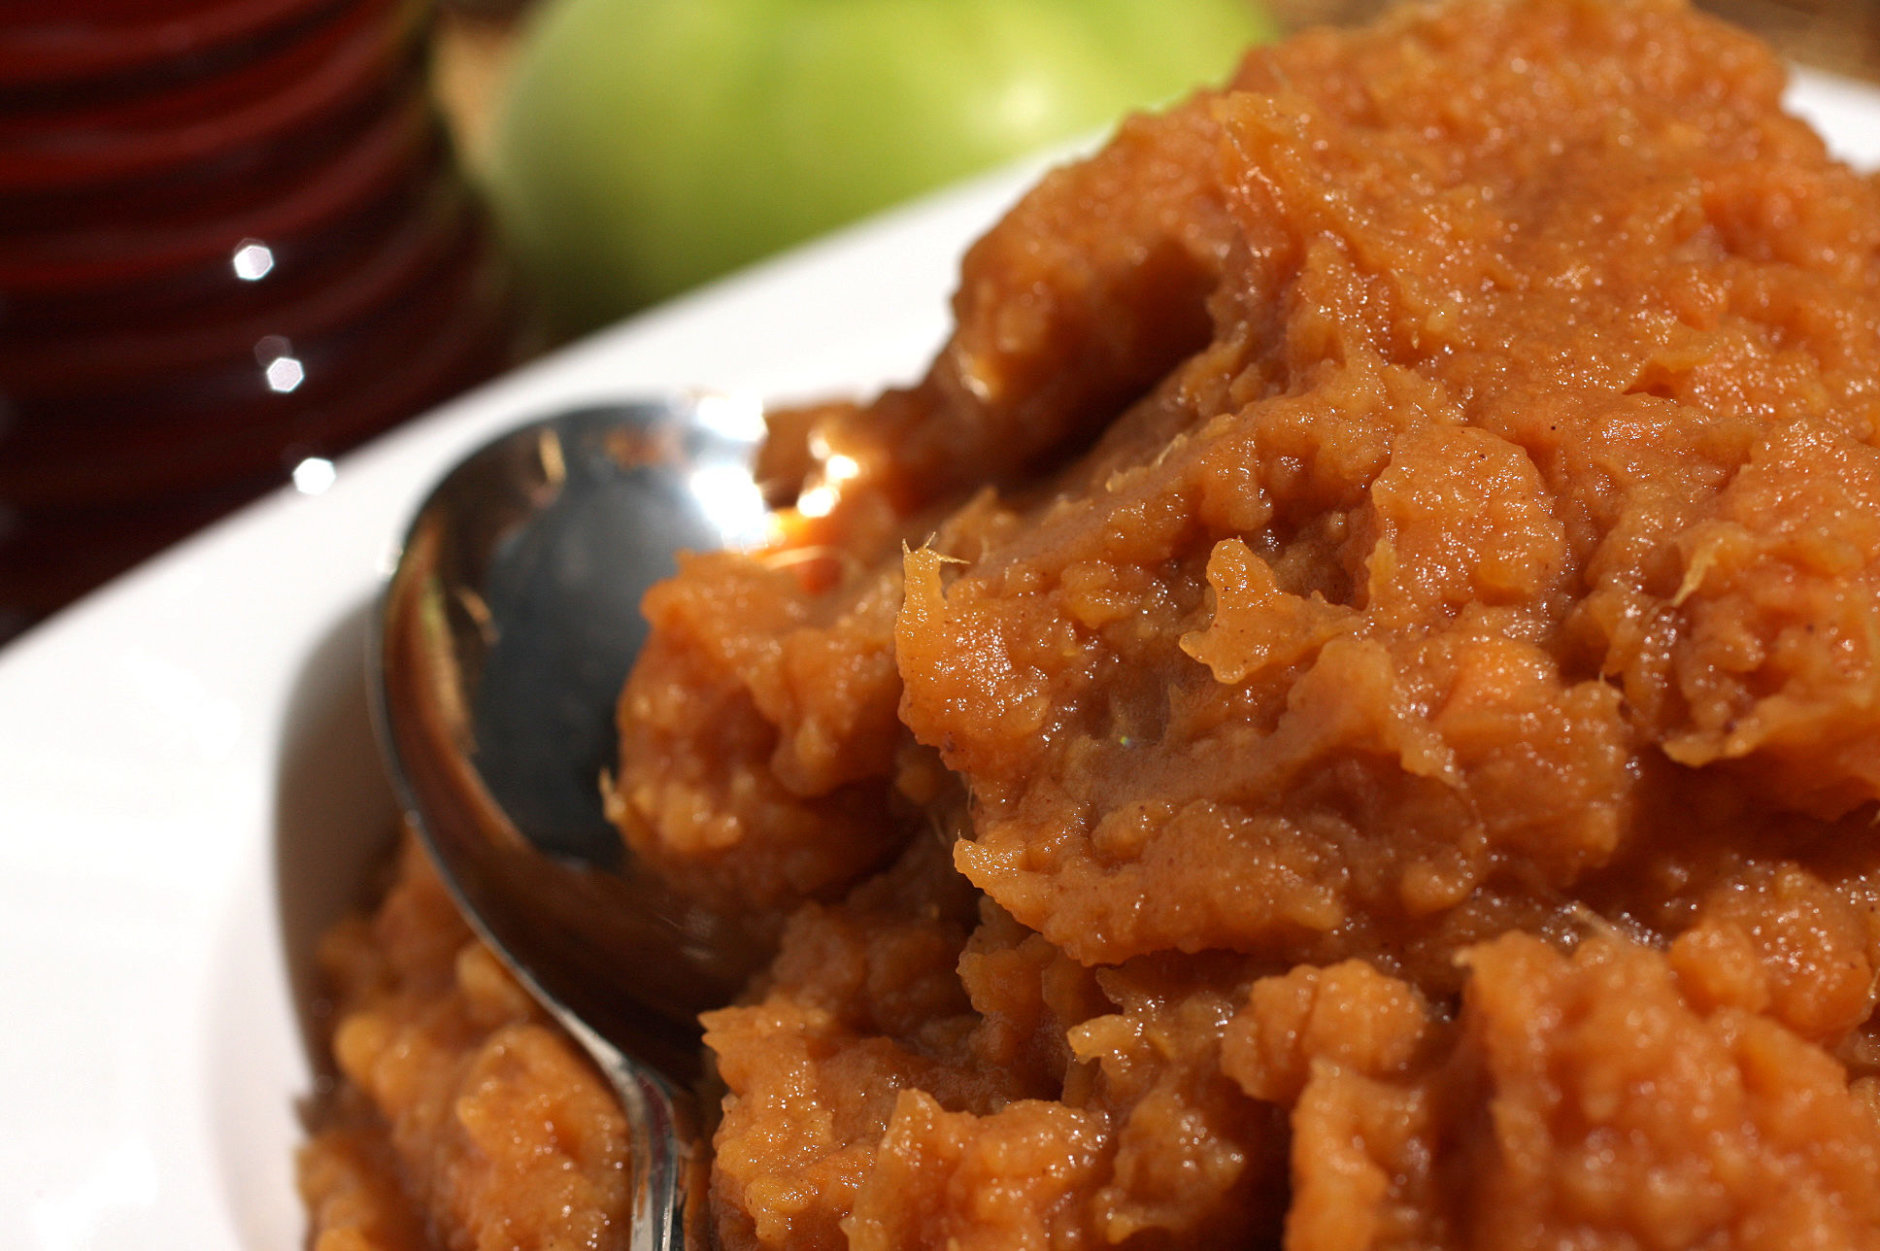 **FOR USE WITH AP LIFESTYLES**     Mashed Sweet potatoes, Apples and Honey is seen in this Sunday, Aug. 17, 2008 photo. Sweet potatoes, sometimes incorrectly referred to as yams which are uncommon in North America, are low in calories and high in important vitamins and flavor. This  Mashed Sweet potatoes, Apples and Honey can be prepared in a microwave, freeing up needed stove top space. (AP Photo/Larry Crowe)